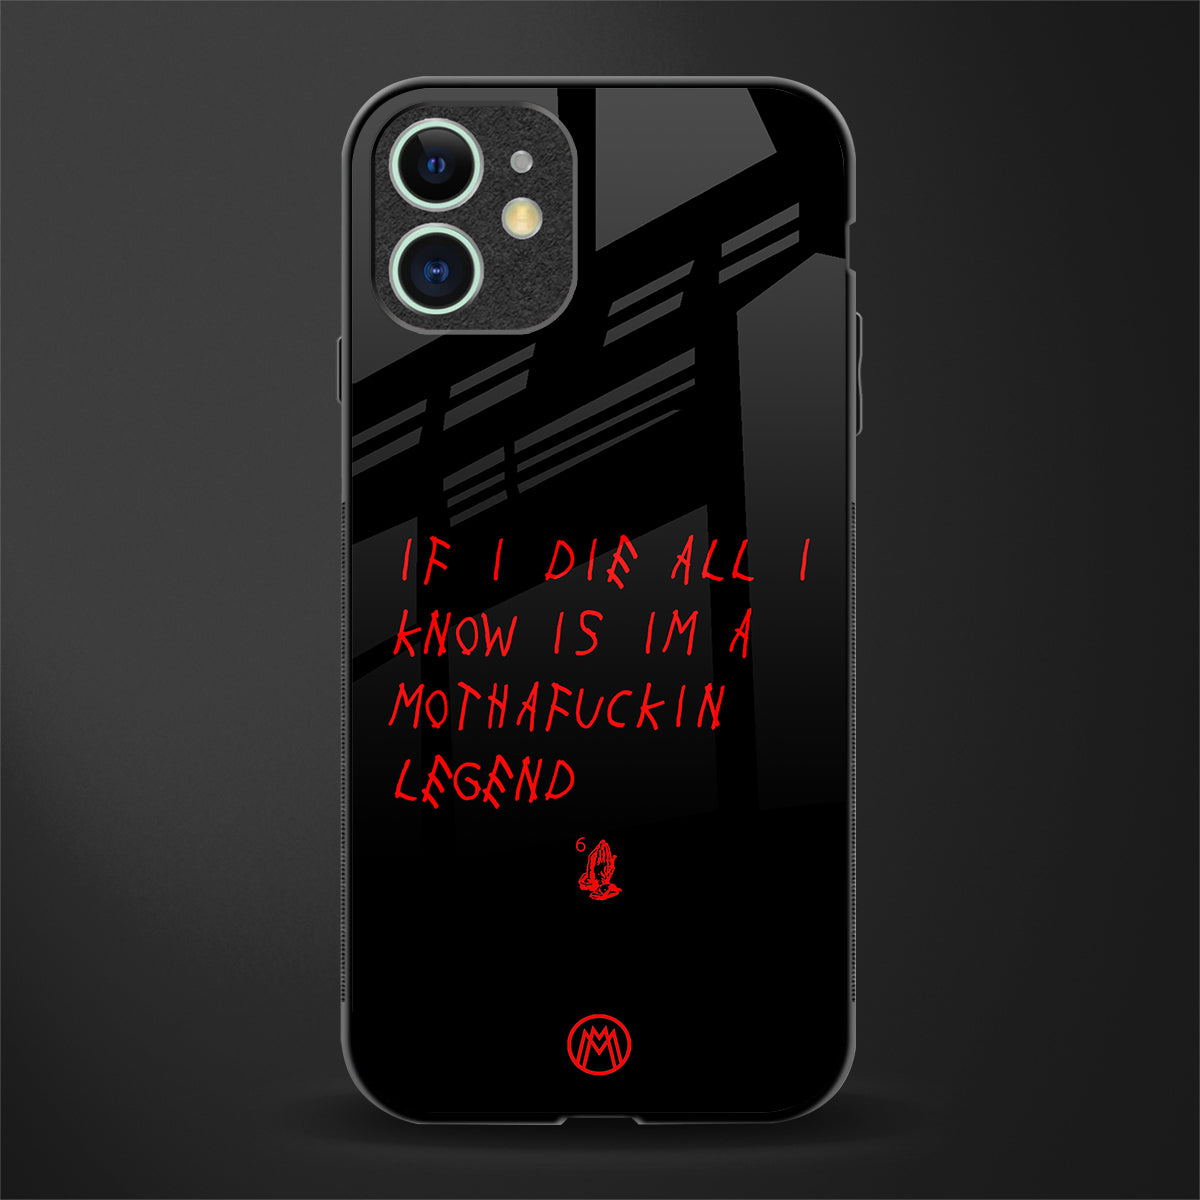 i am a legend glass case for iphone 11